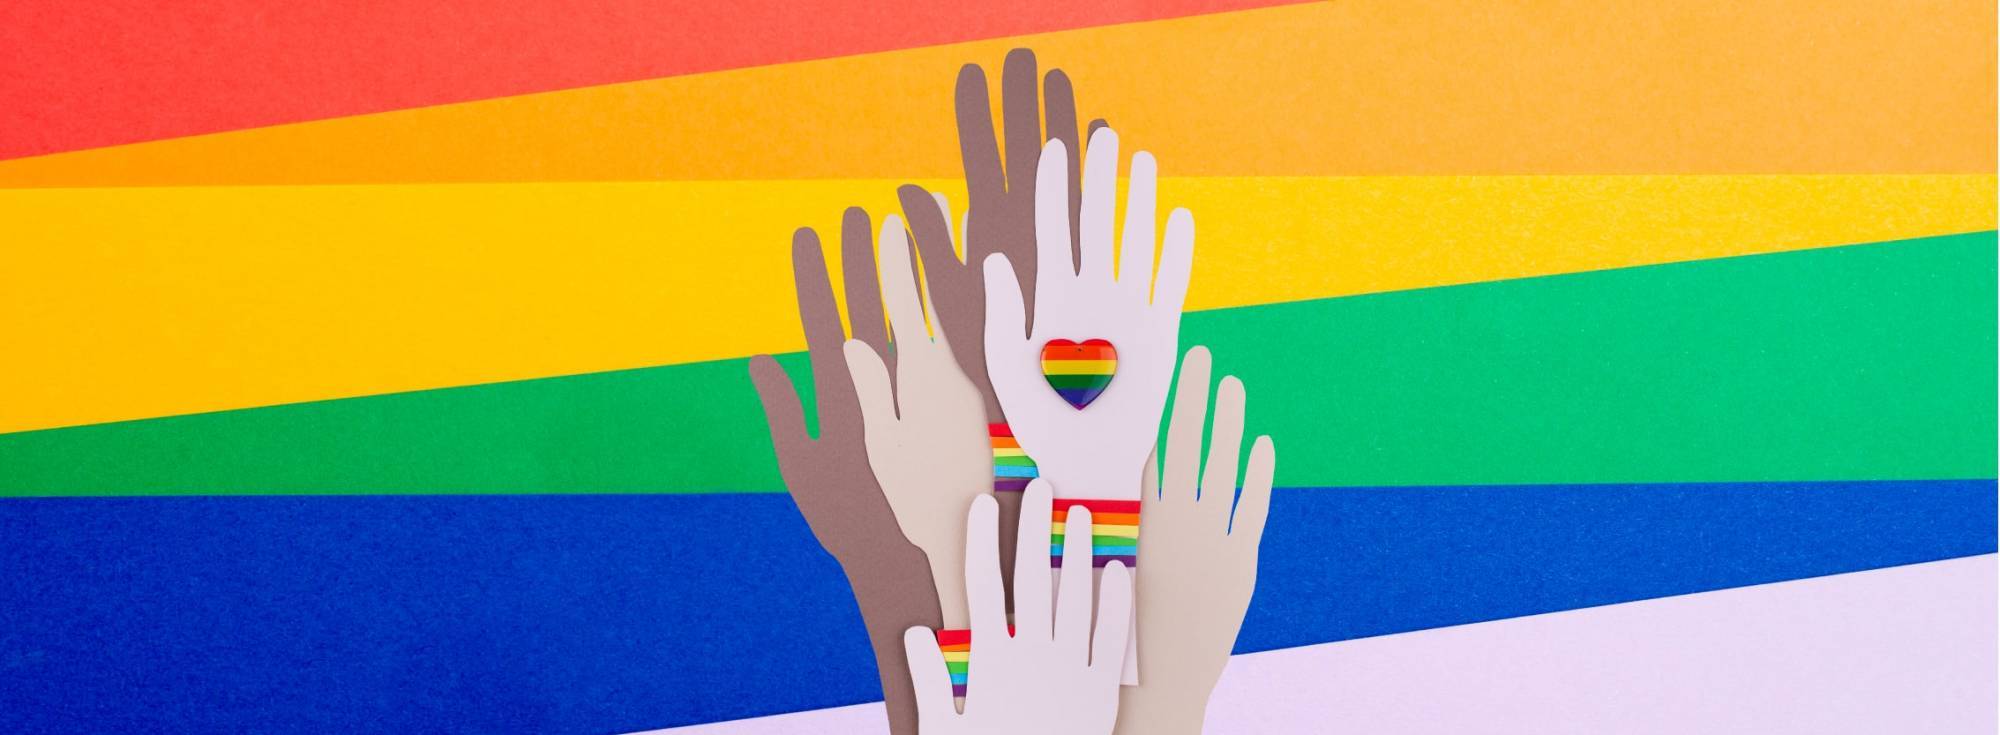 Image with rainbow colors that are symbolic of PRIDE Month celebrations. Uplifted hands of all races with rainbow heart images on the hands.